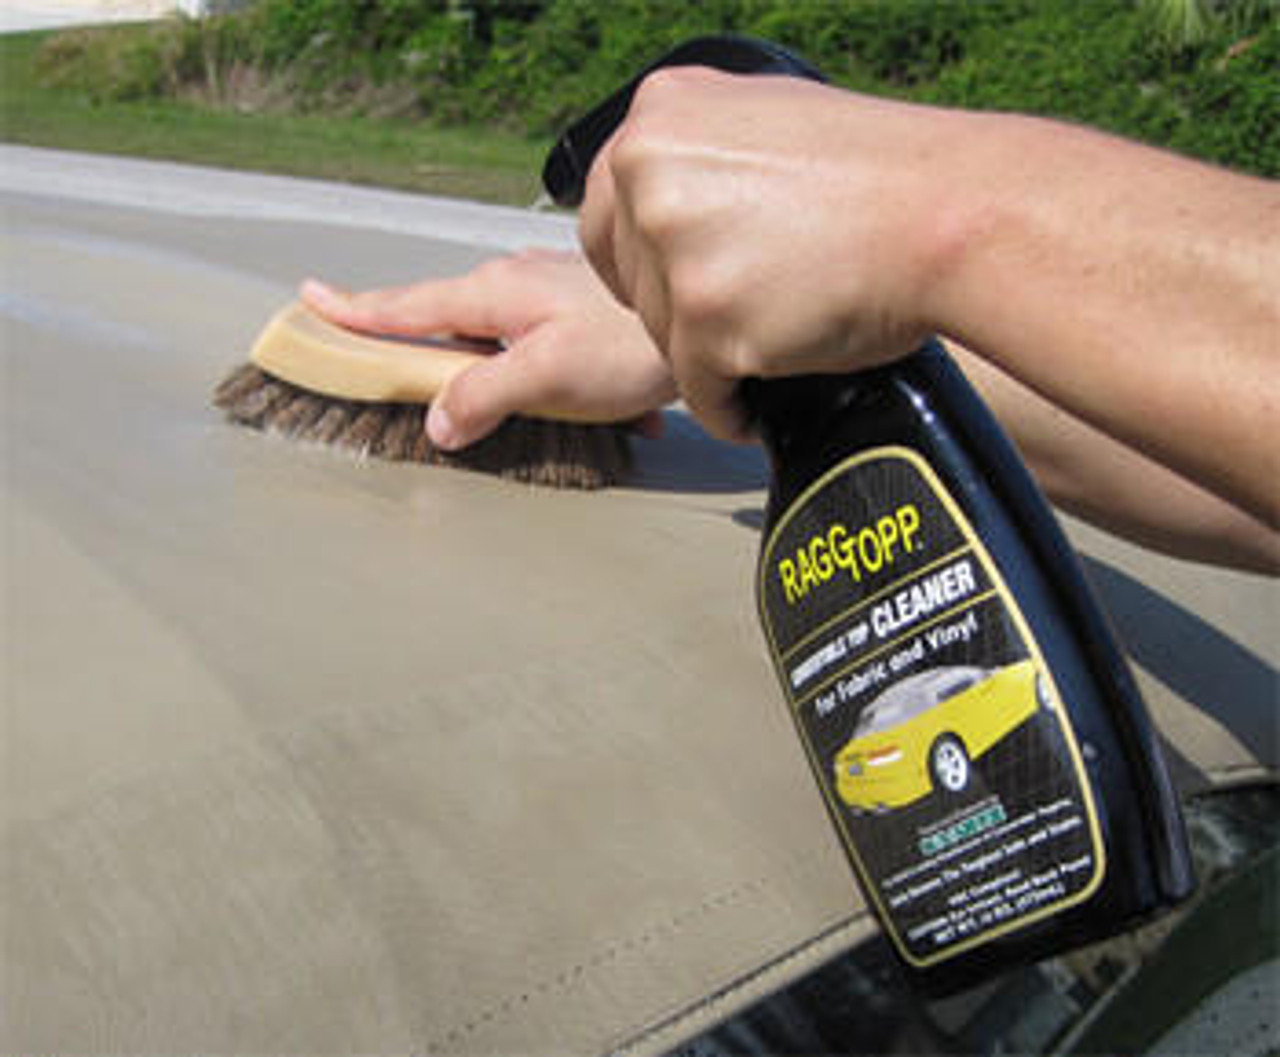 Vinyl & Canvas Convertible Top Cleaner and Protectant by Raggtopp